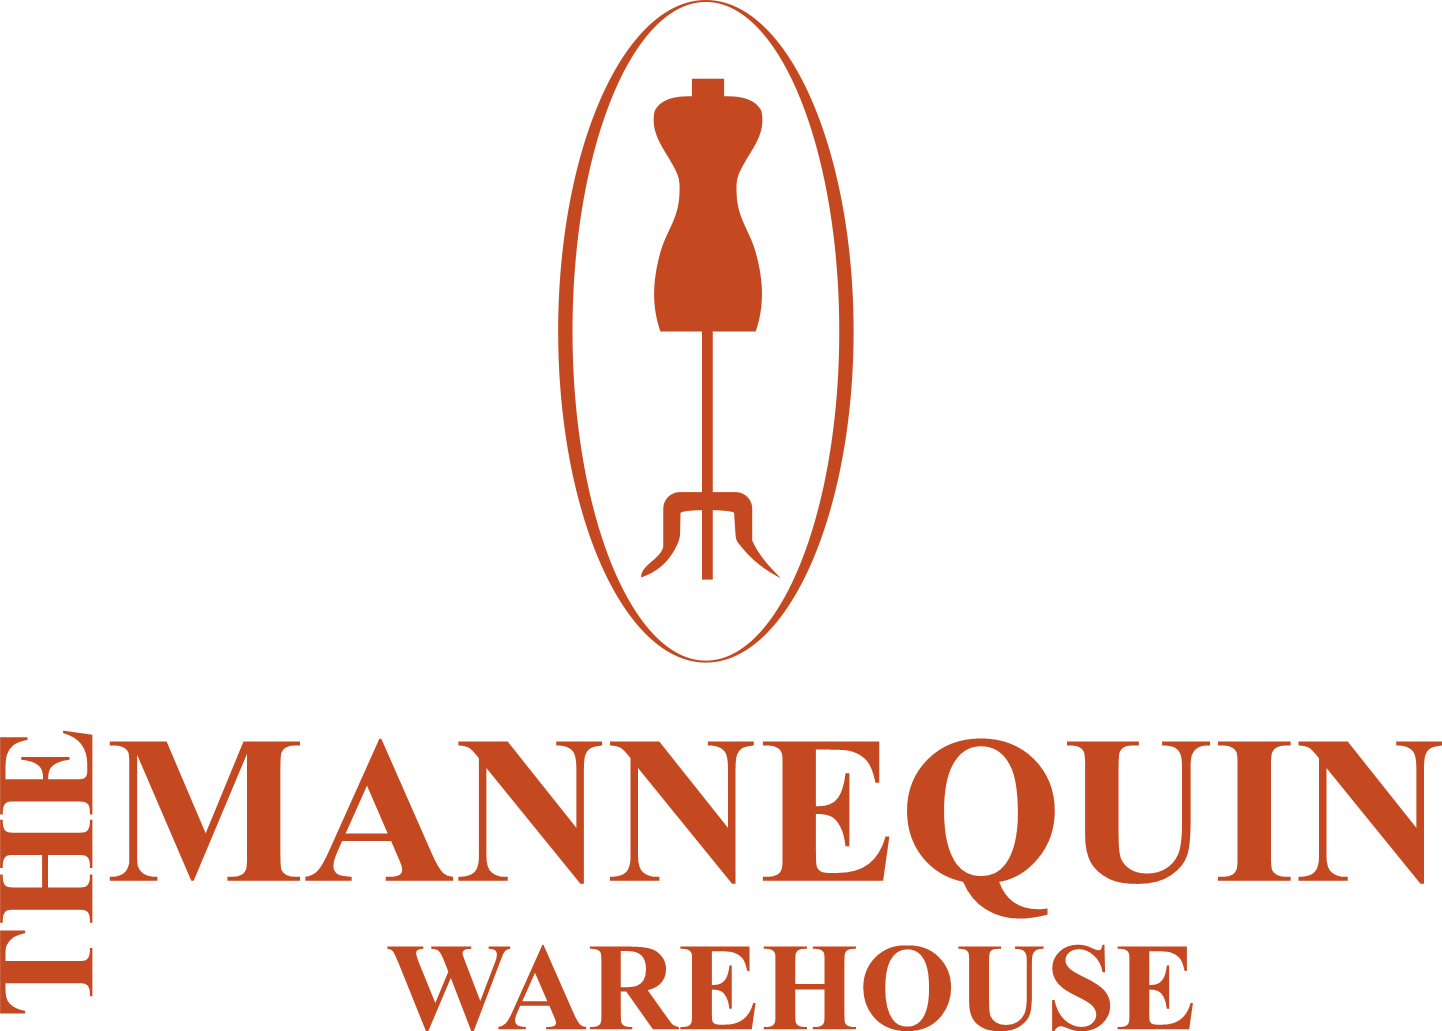 The Mannequin Warehouse